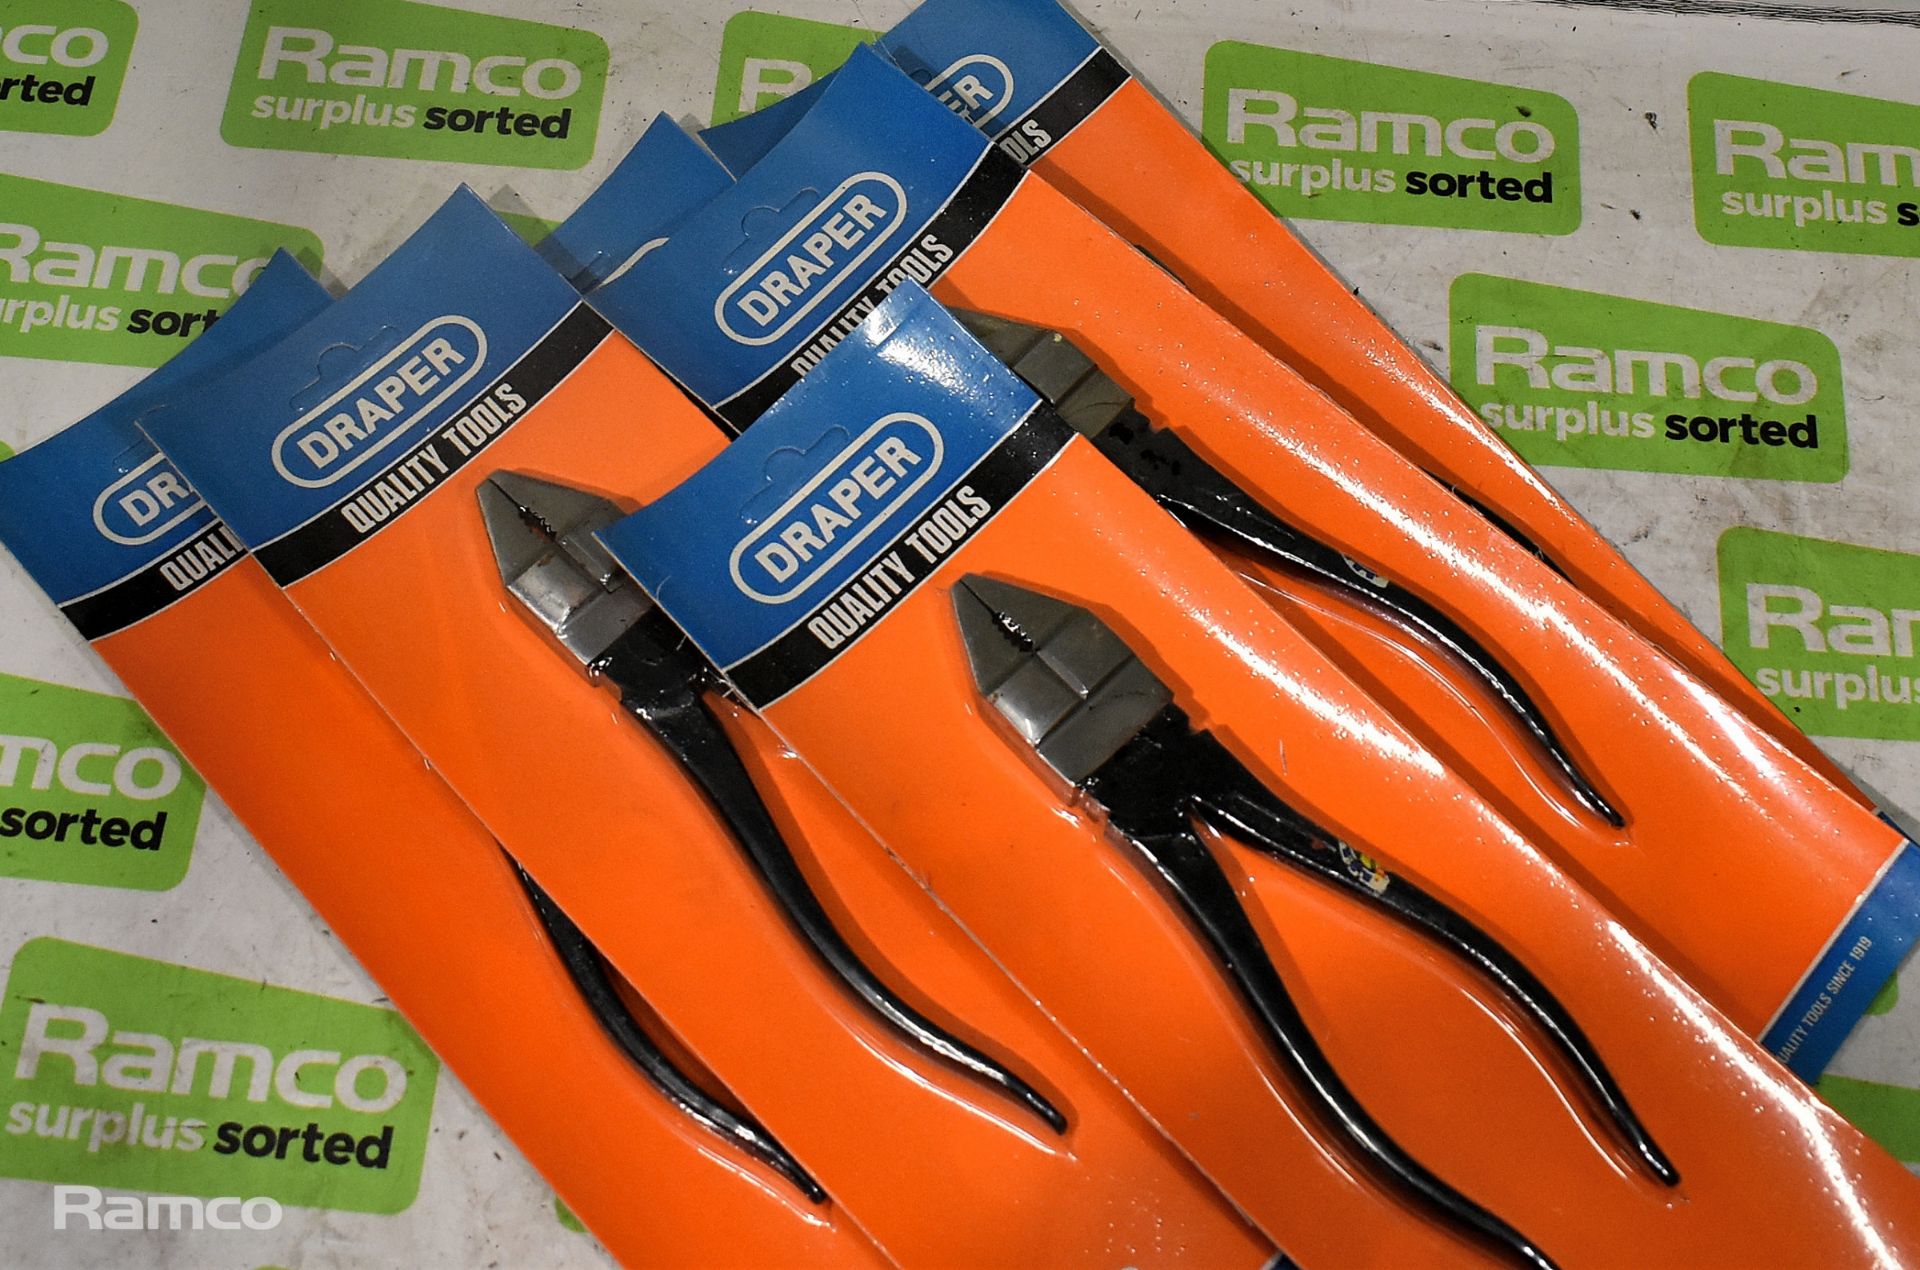 2x Ram 15 x 22mm basic wrenches, 6x Draper 7 inch pliers - Image 2 of 4